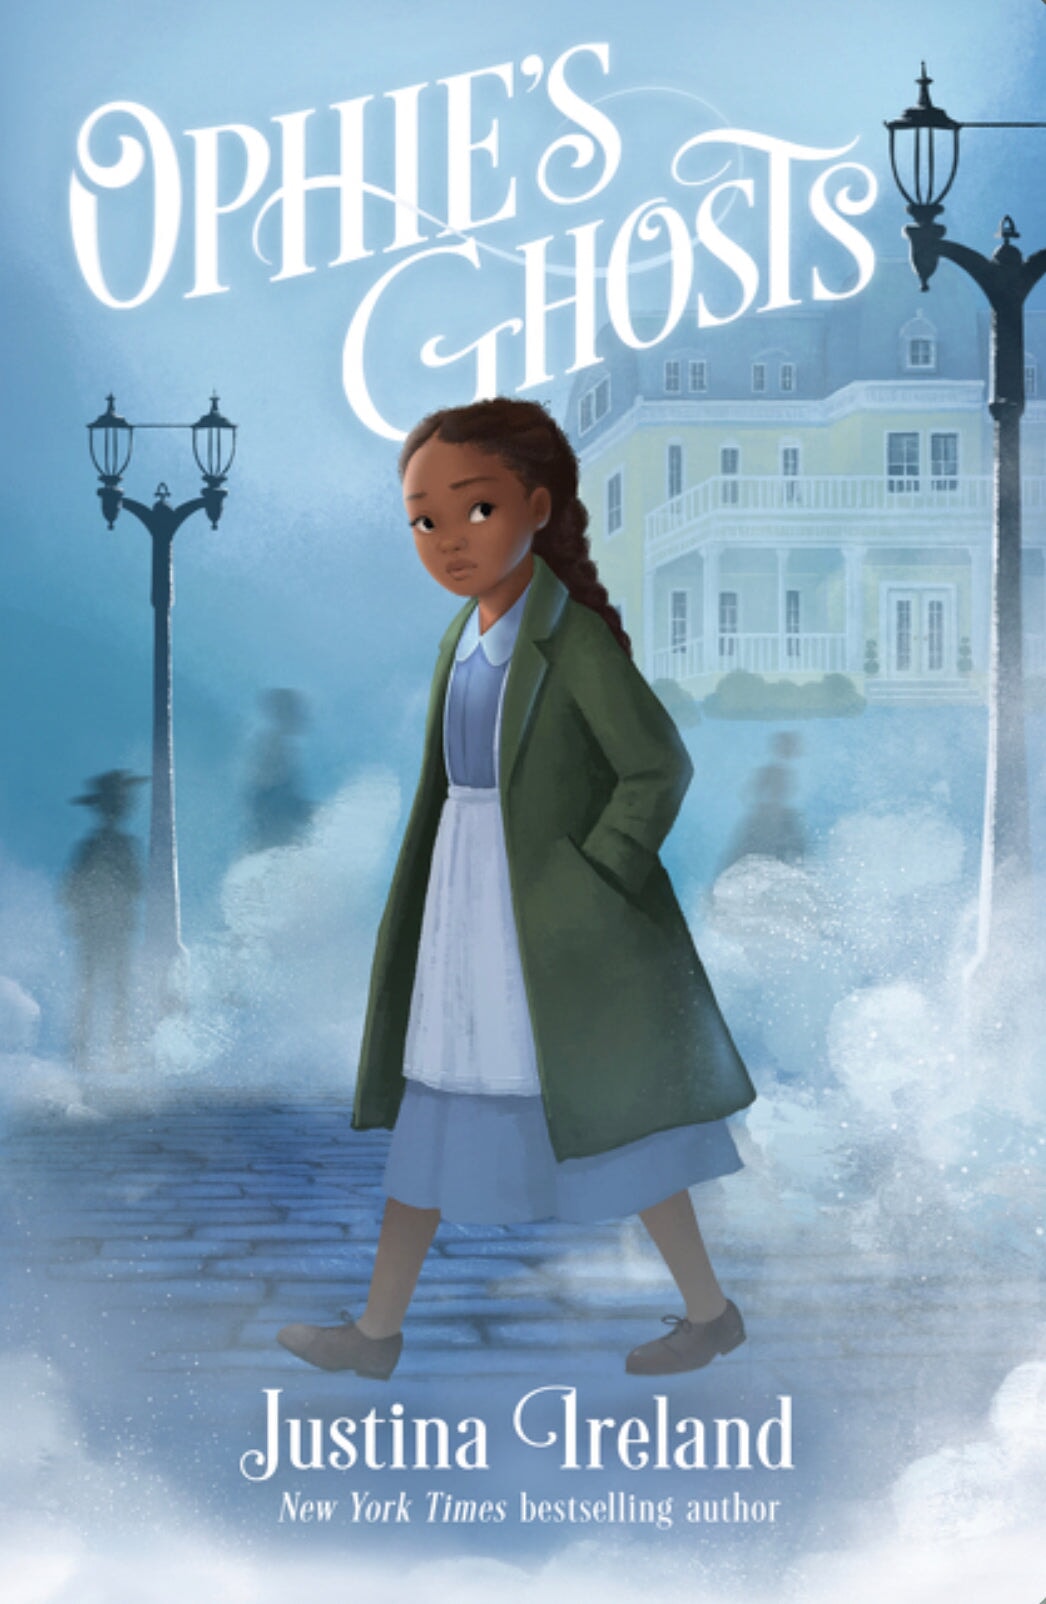 Ophie’s Ghosts by Justina Ireland | Historical Fiction Middle Grade Books - Alder & Alouette